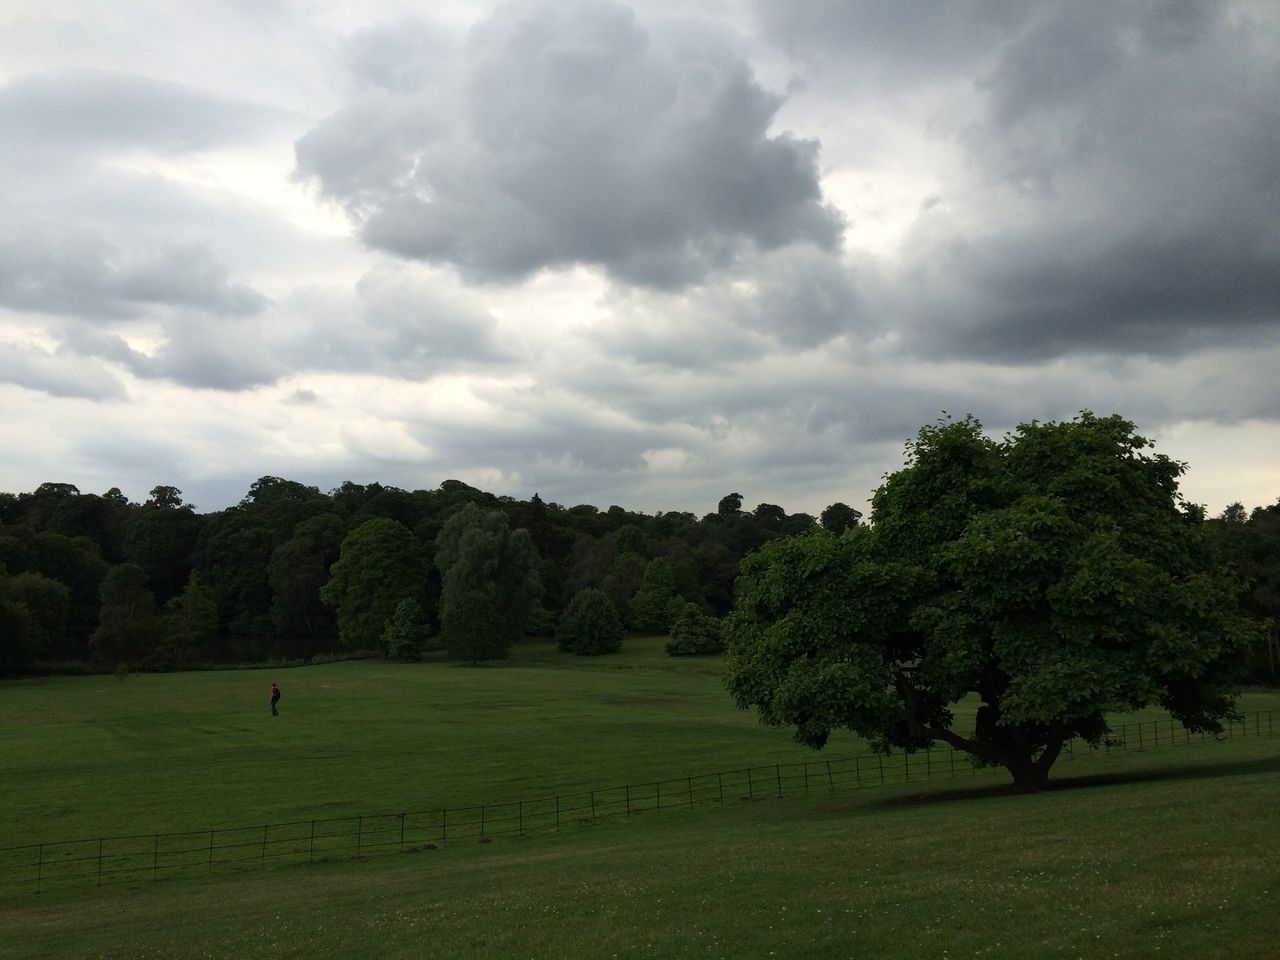 tree, sky, grass, landscape, cloud - sky, tranquil scene, tranquility, field, cloudy, scenics, green color, beauty in nature, nature, grassy, cloud, growth, non-urban scene, idyllic, day, outdoors